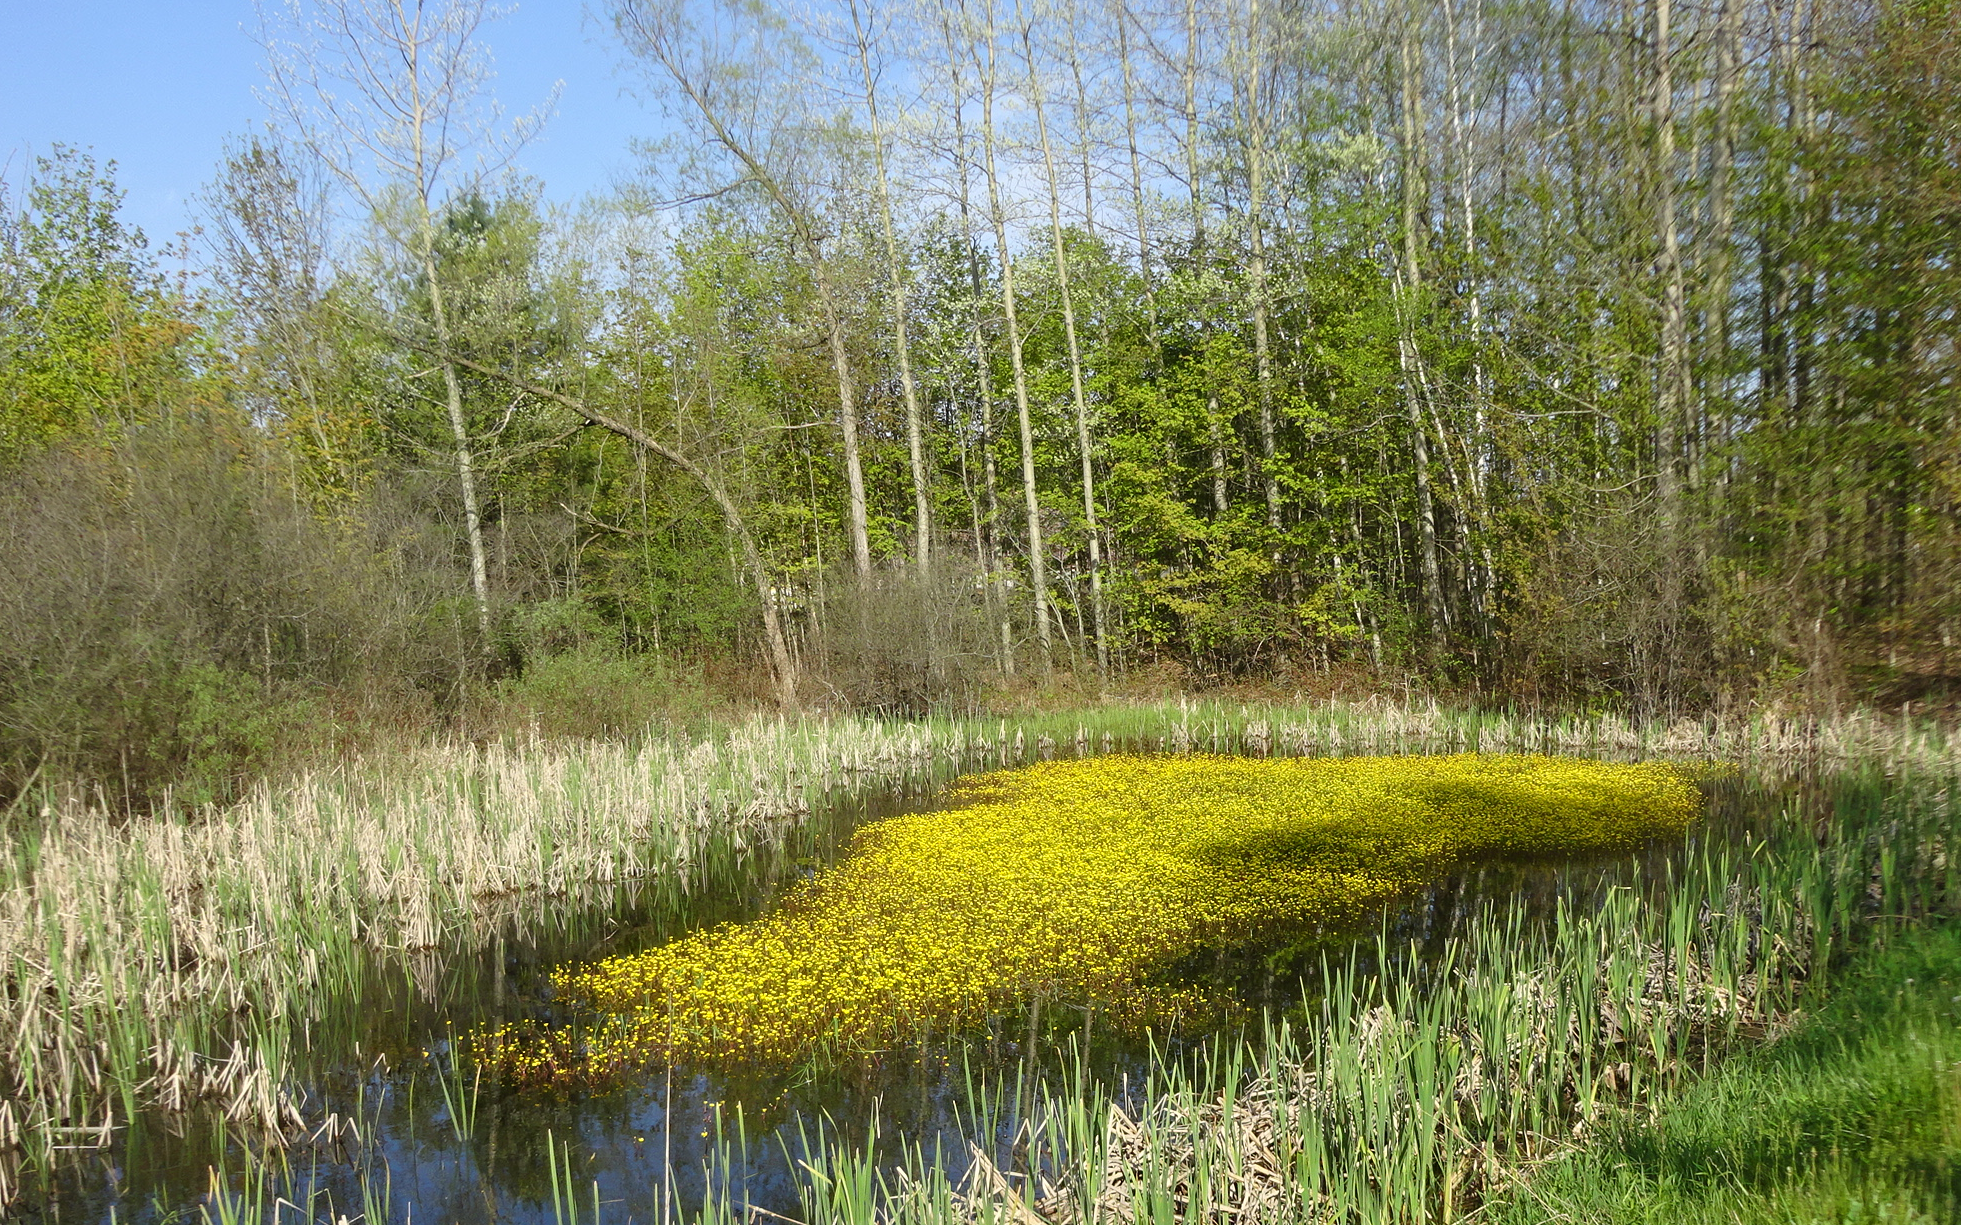 Yellow plants in pond